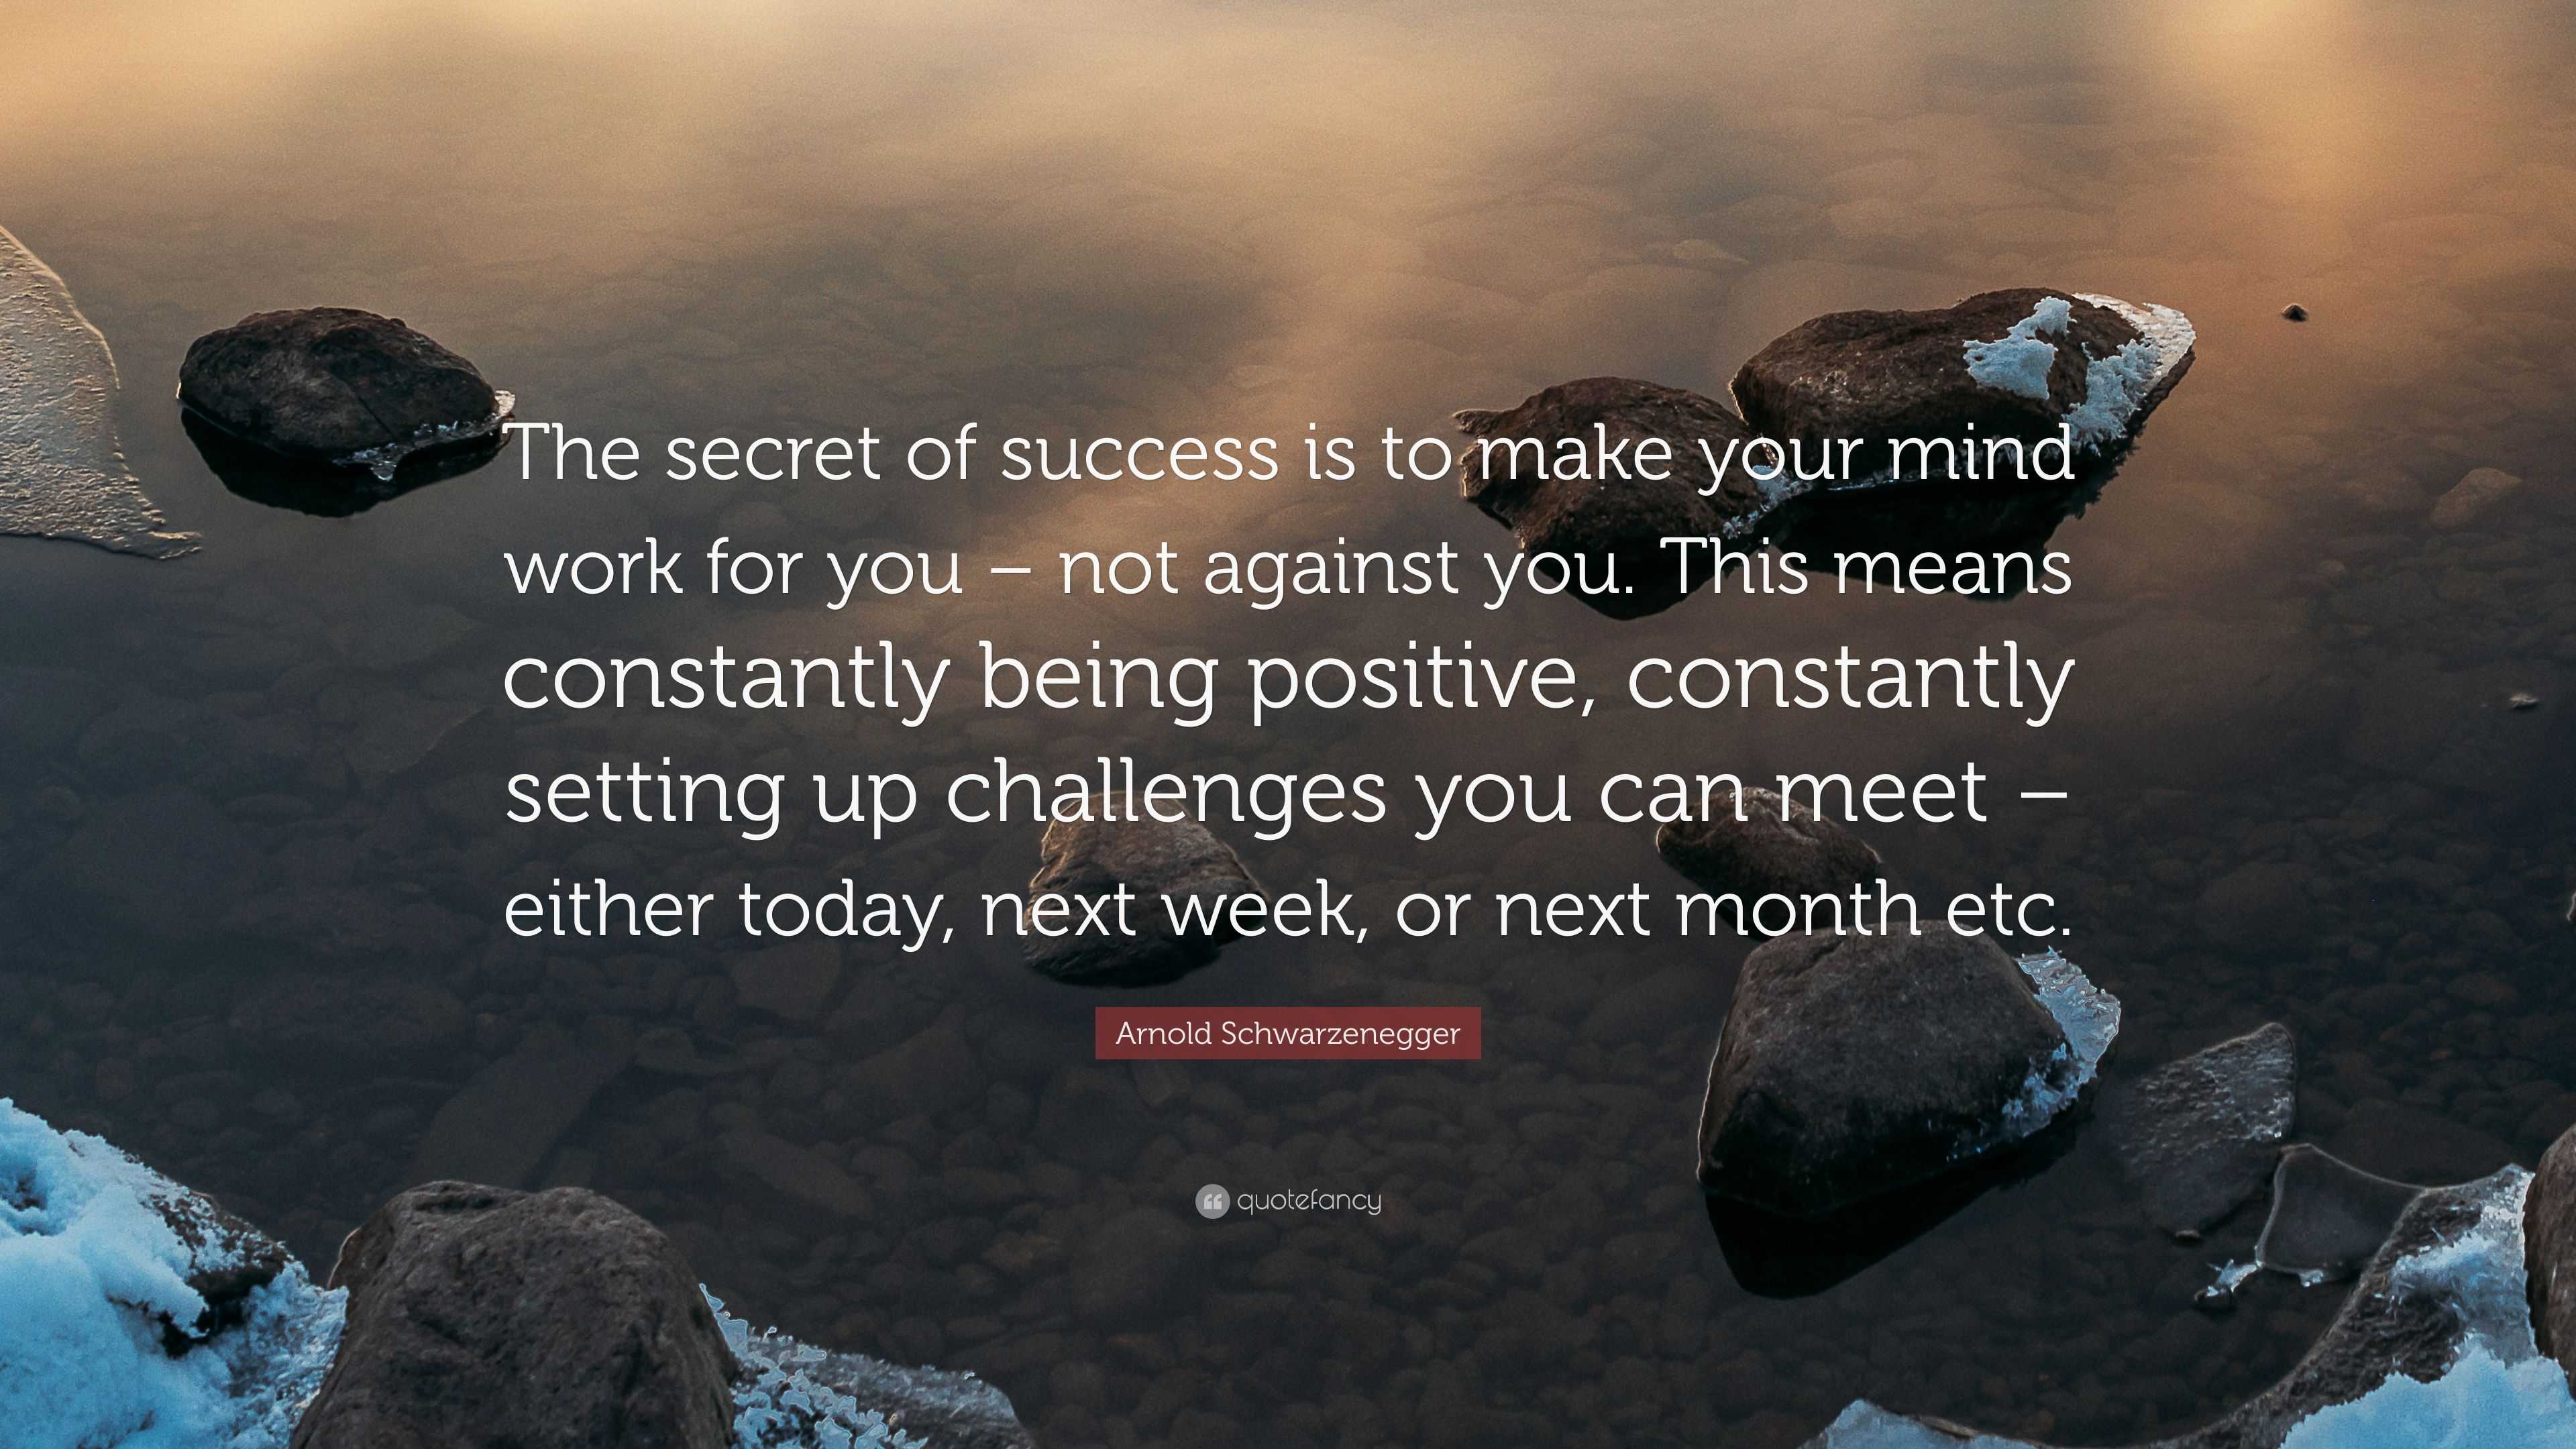 Arnold Schwarzenegger Quote: “The secret of success is to make your